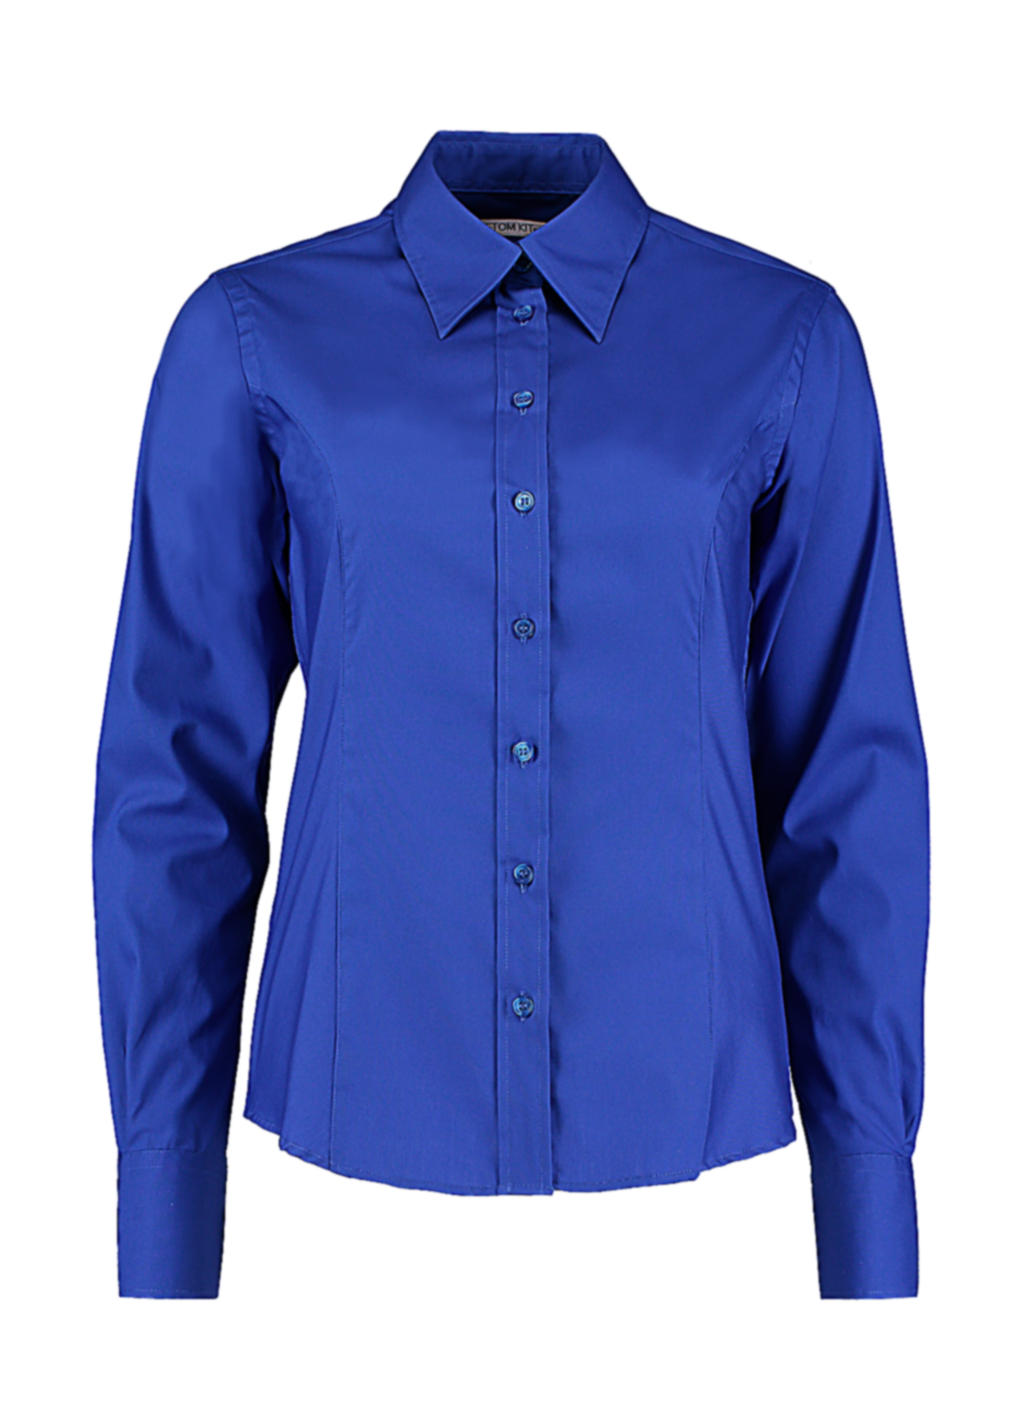  Womens Tailored Fit Premium Oxford Shirt in Farbe Royal